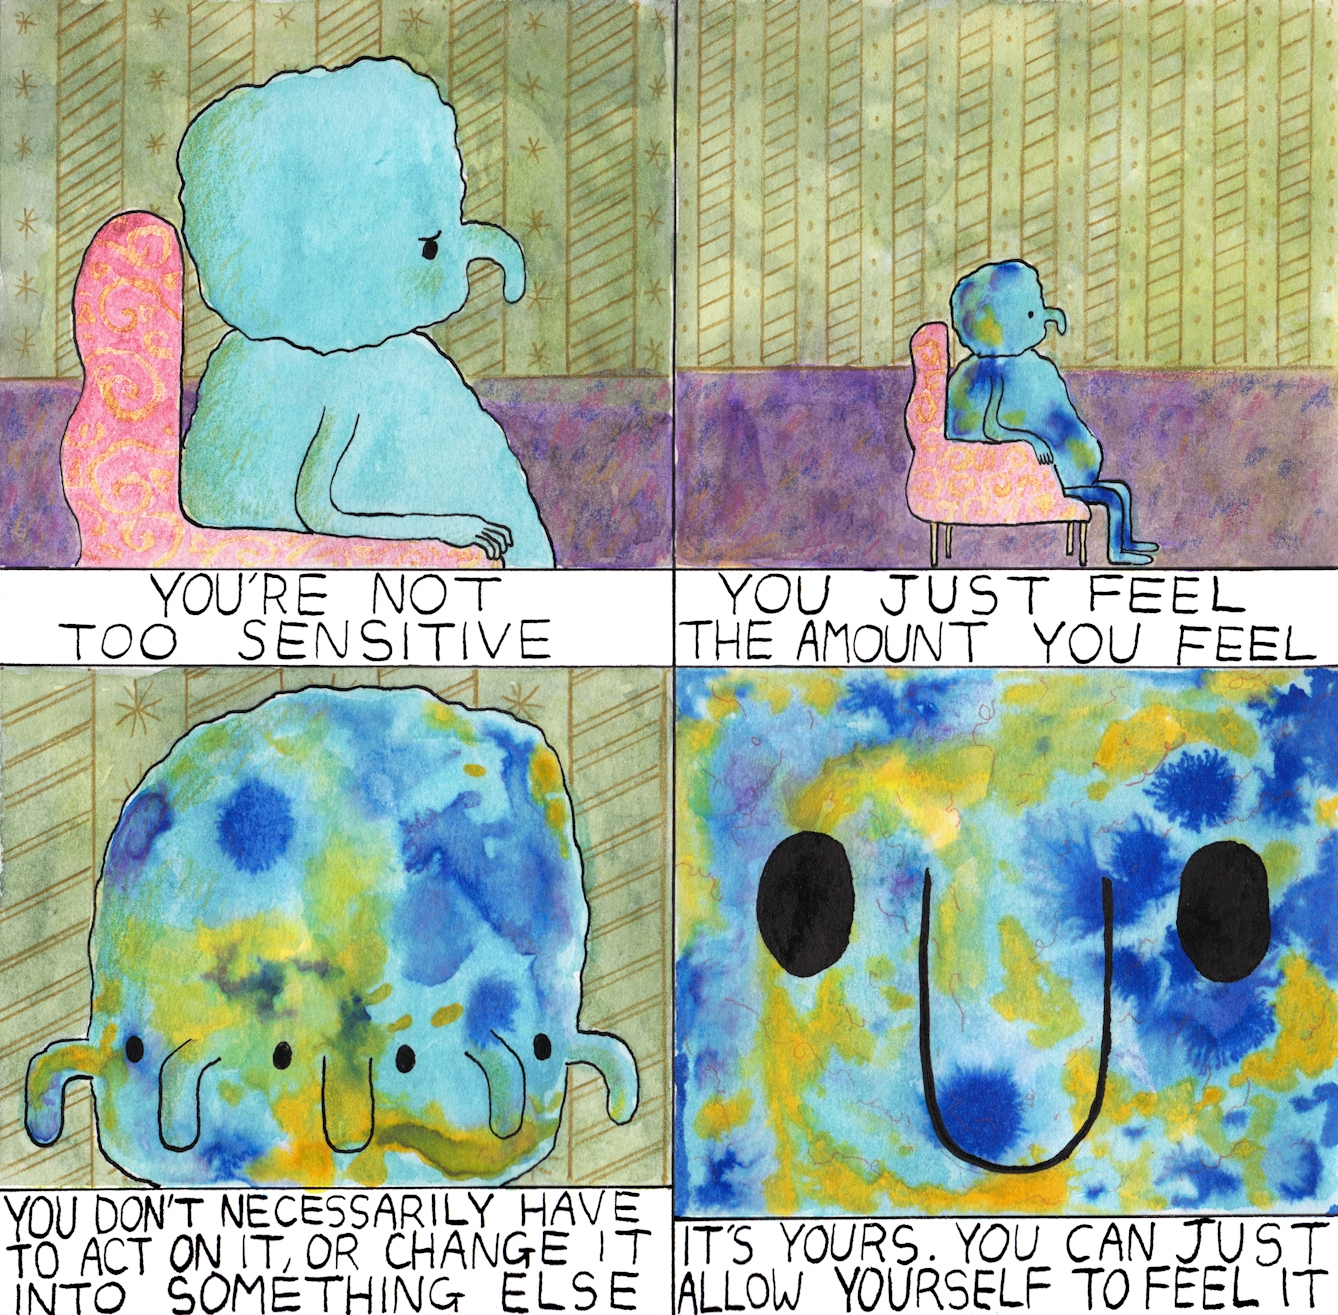 Ideas comic by Rob Bidder. Text reads: You're not too sensitive... you just feel the amount you feel... you don't necessarily have to act on it, or change it into something else... It's yours. You can just allow yourself to feel it.